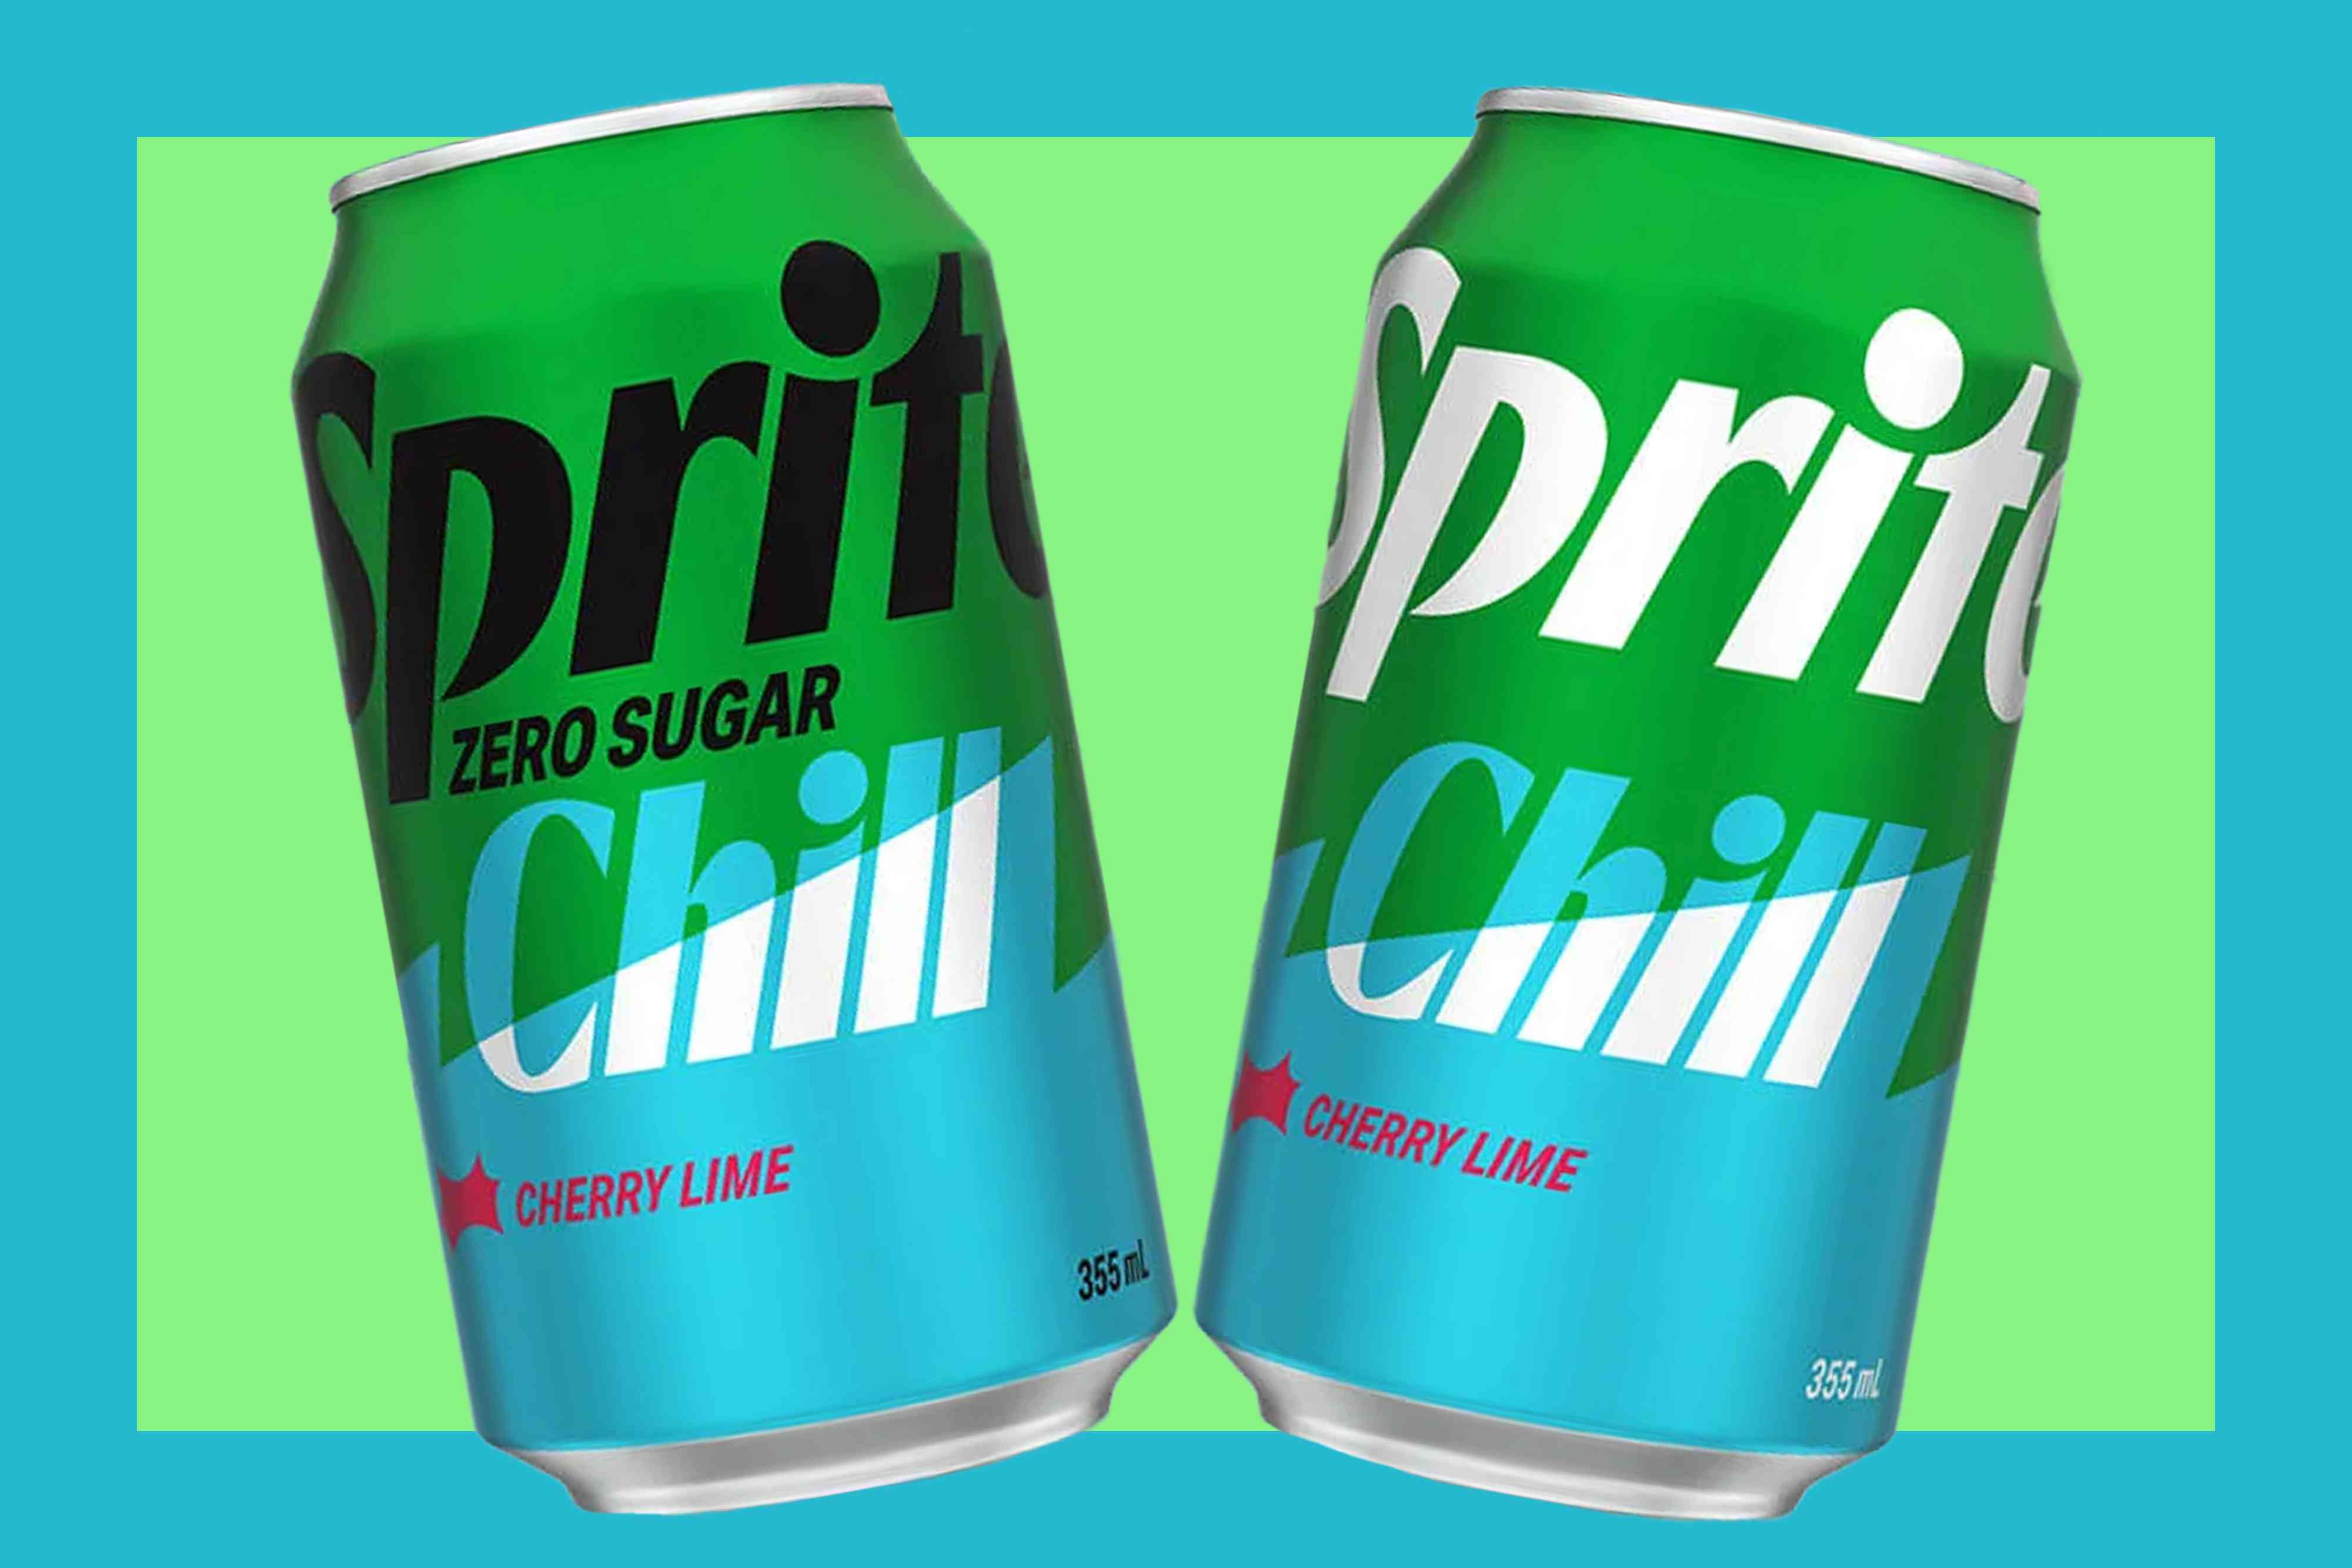 sprite is dropping an all-new, super 'chill' flavor for the summer